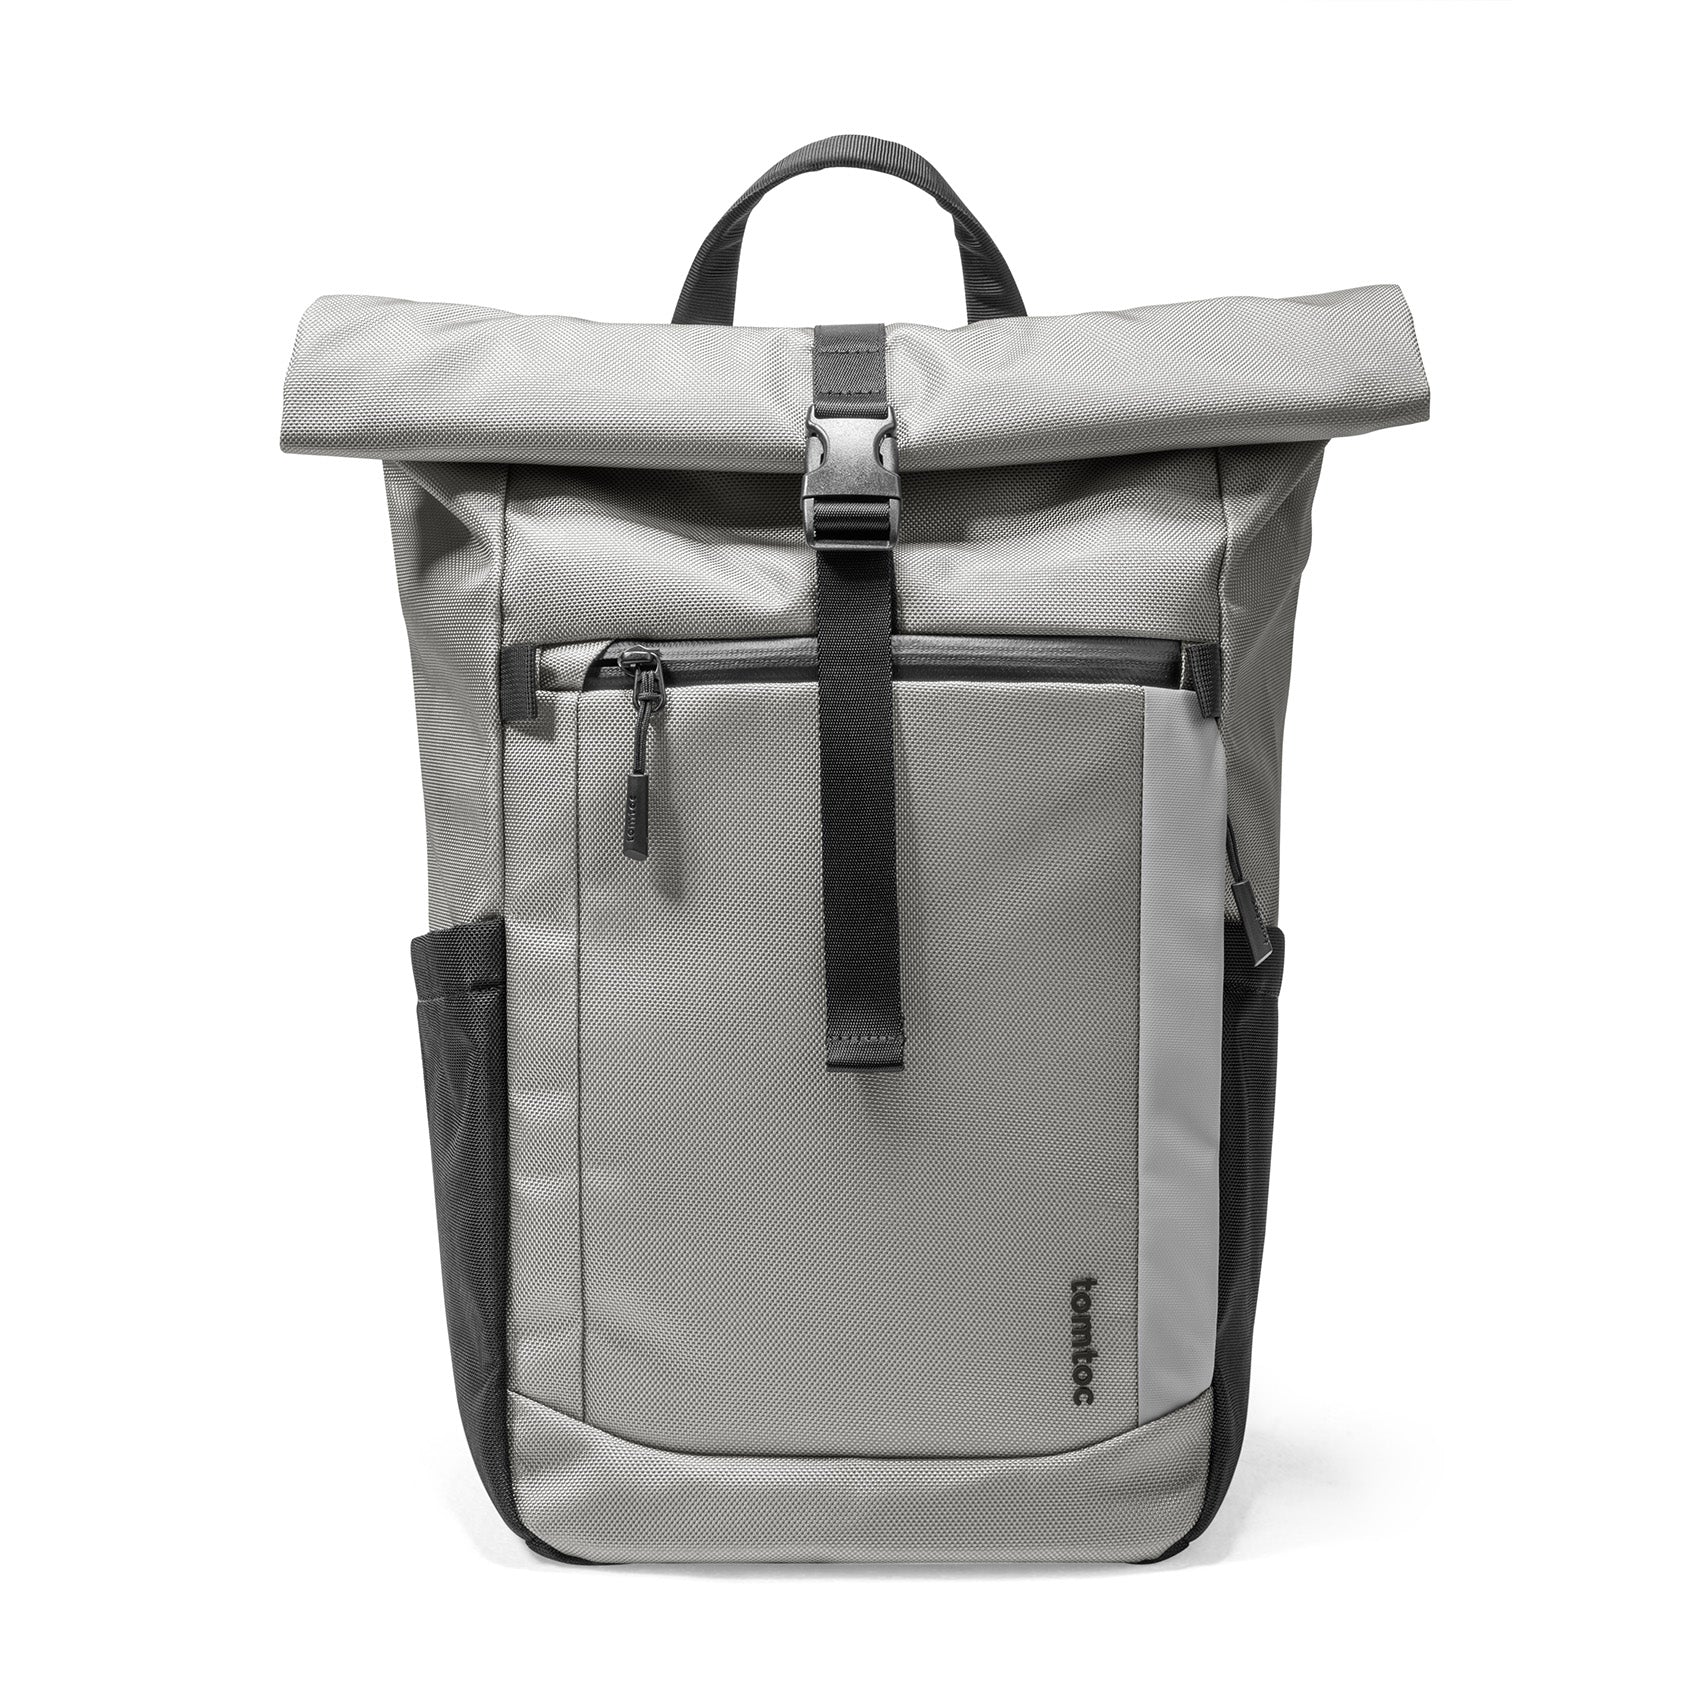 tomtoc 15.6 Inch Rolltop Adjustable Capacity Laptop Backpack - Gray